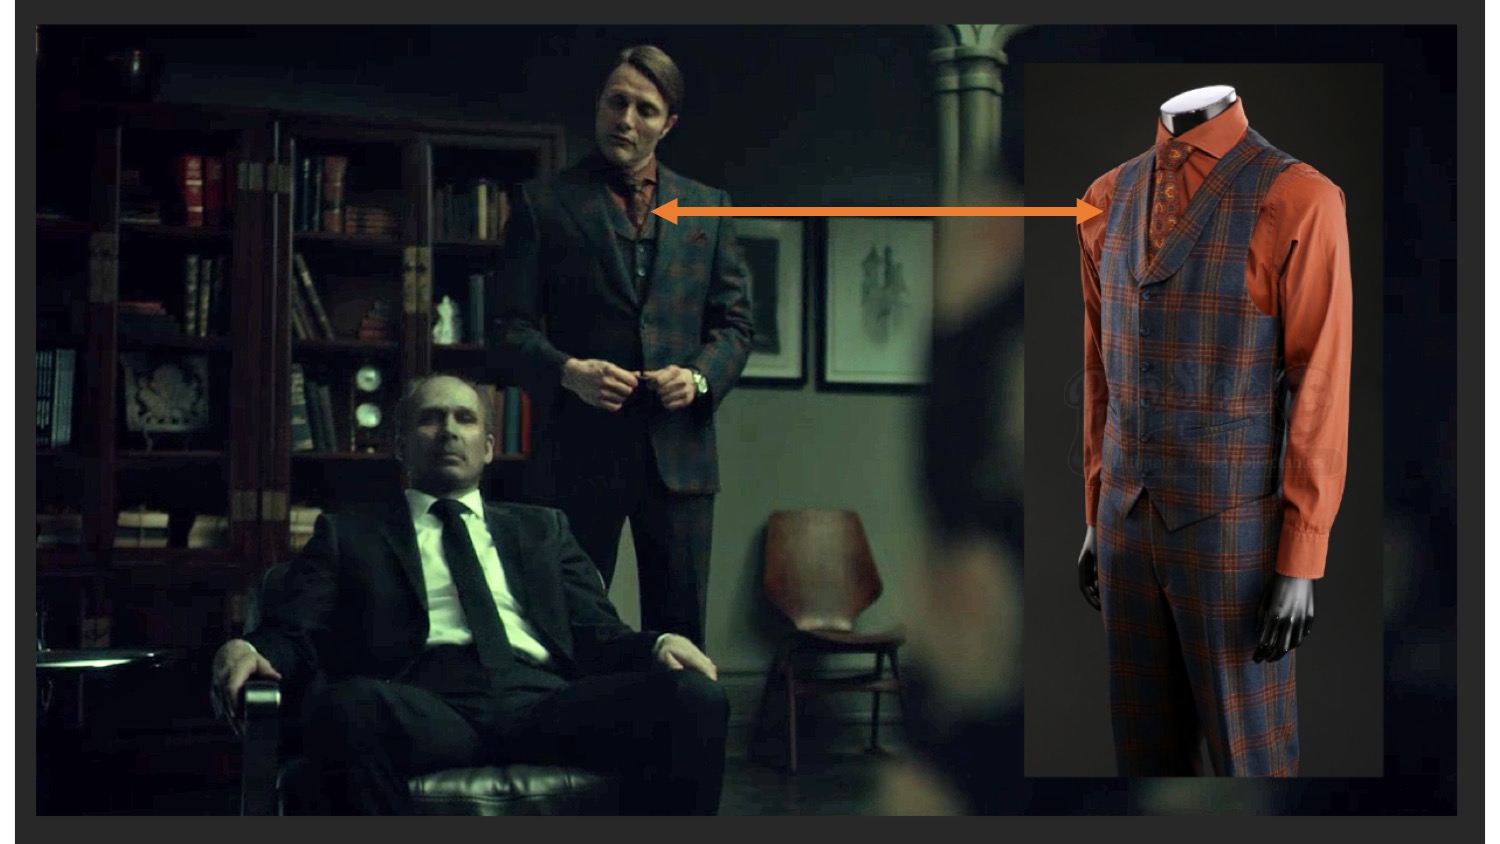 Orange Shirt Hannibal in therapy session standing 